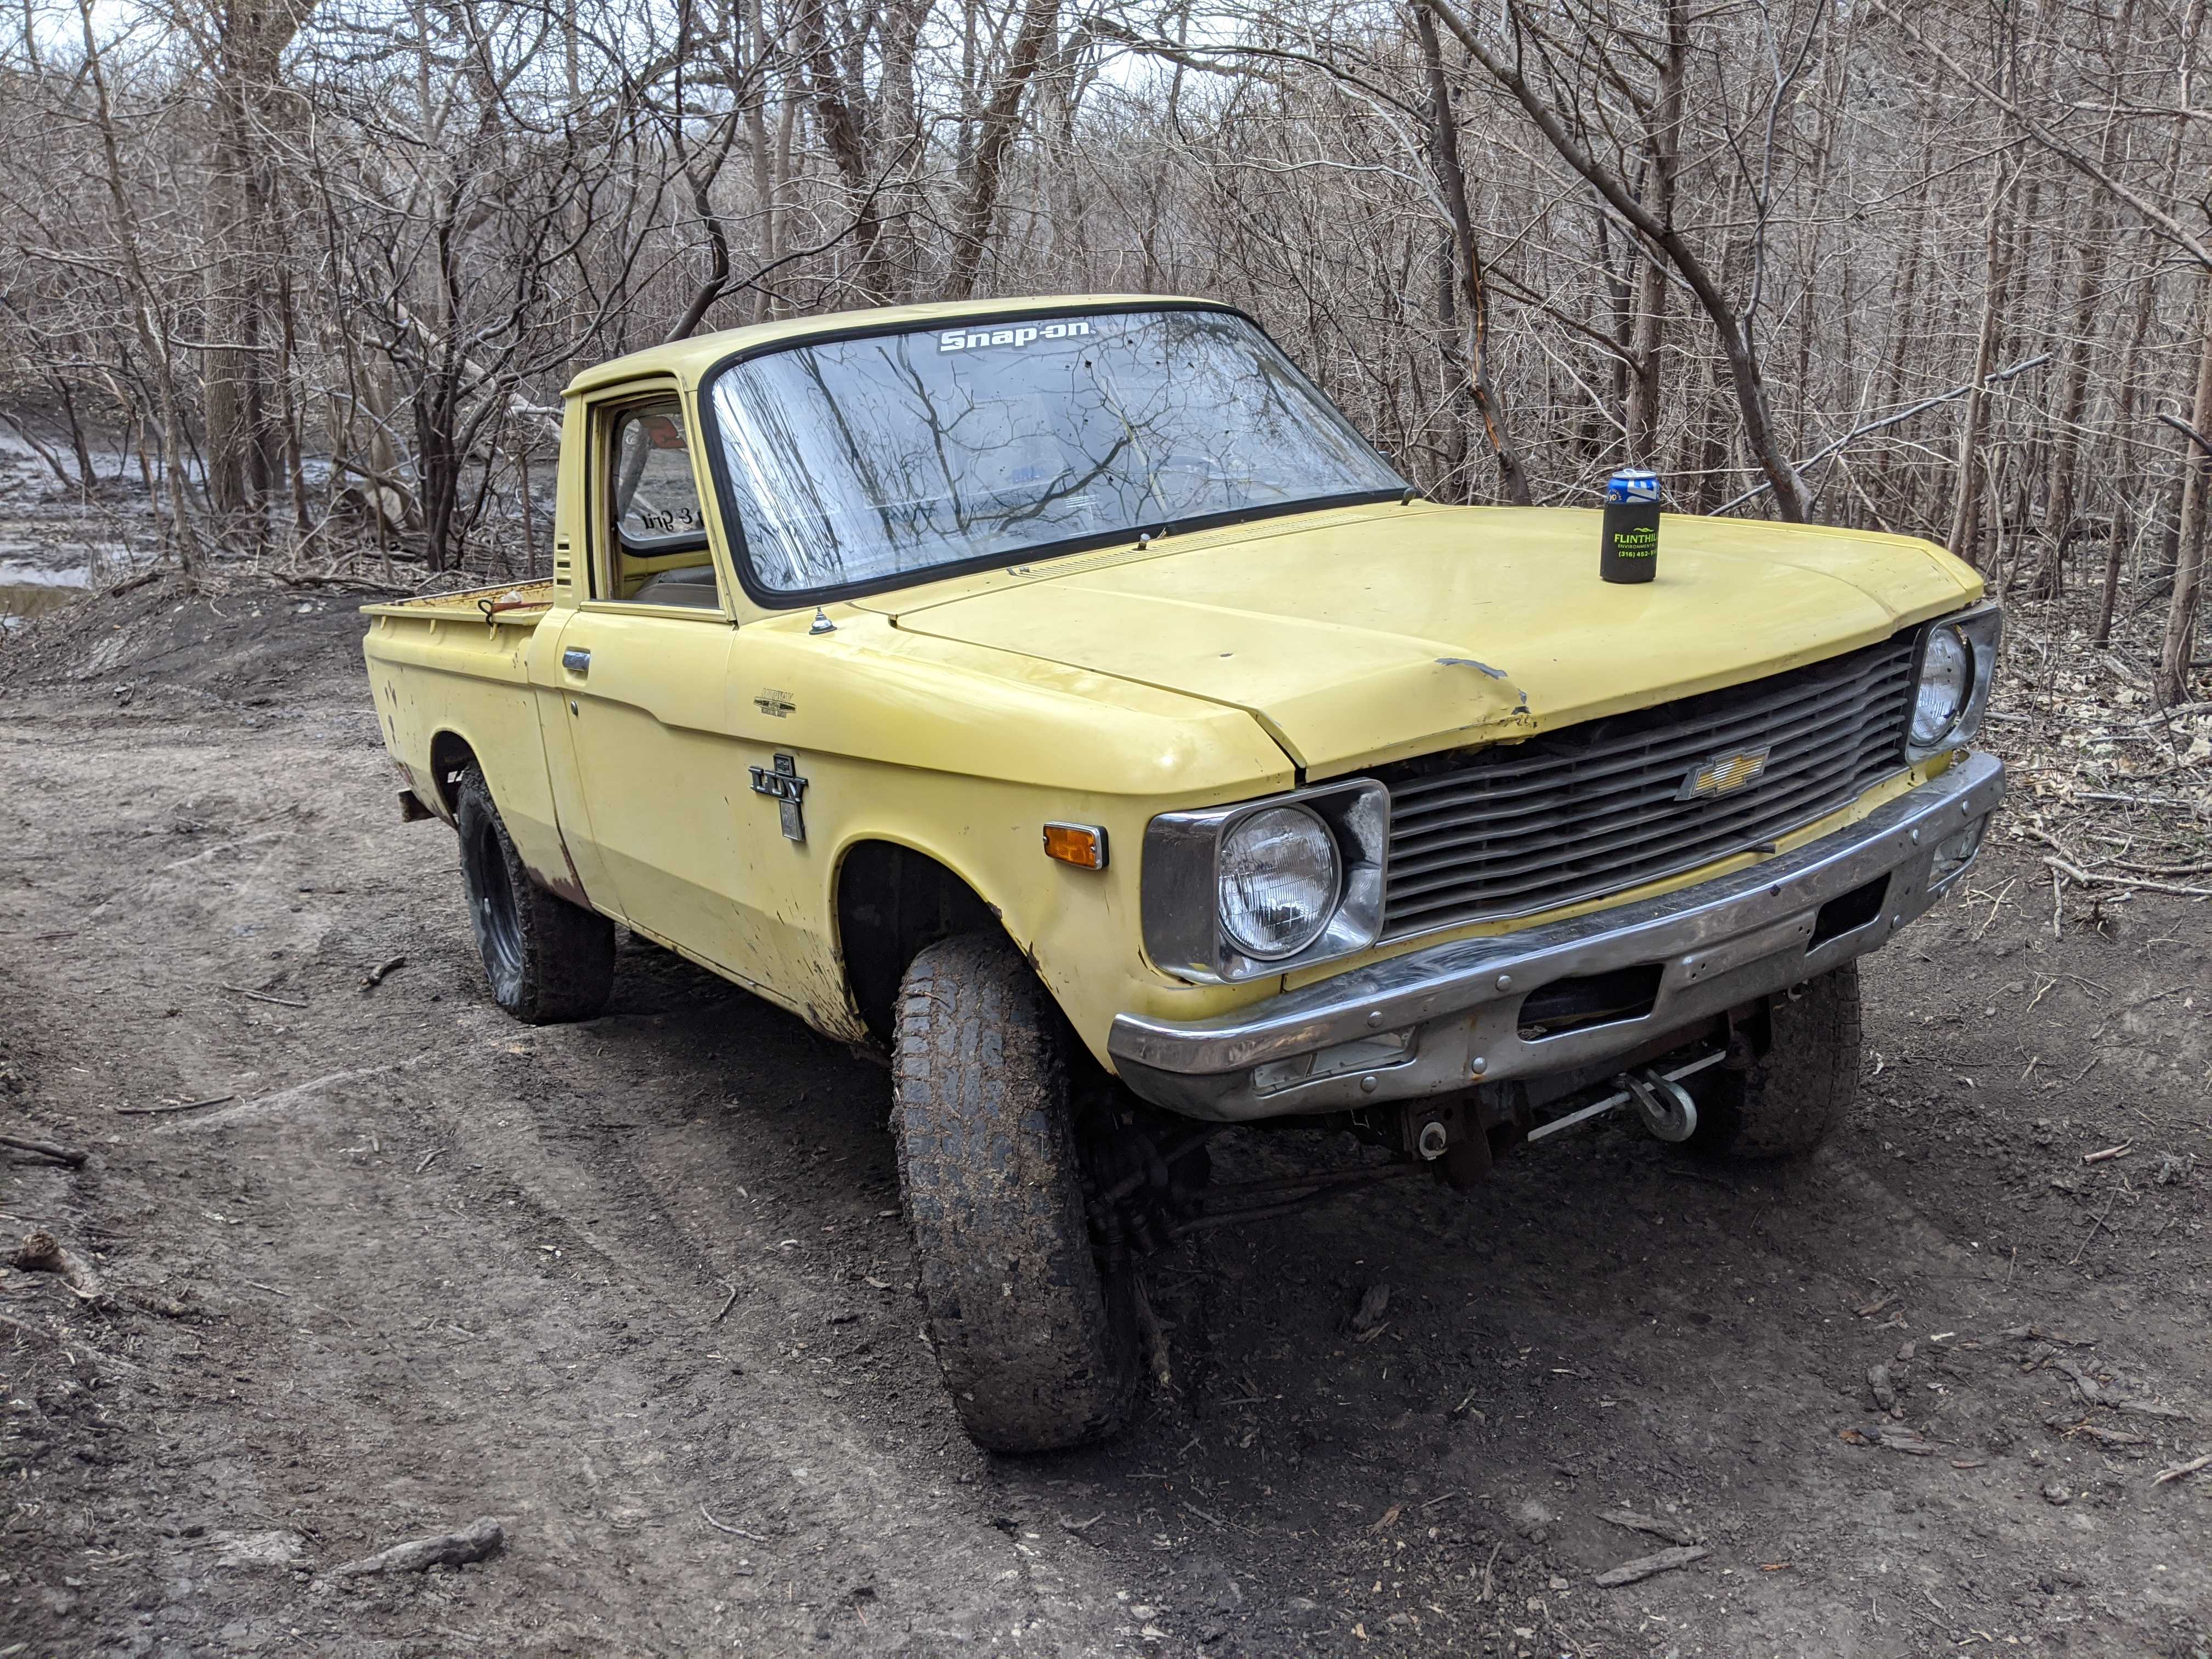 1979 Chevrolet LUV 4x4 (USA), The 4x4 was a new model for 1…